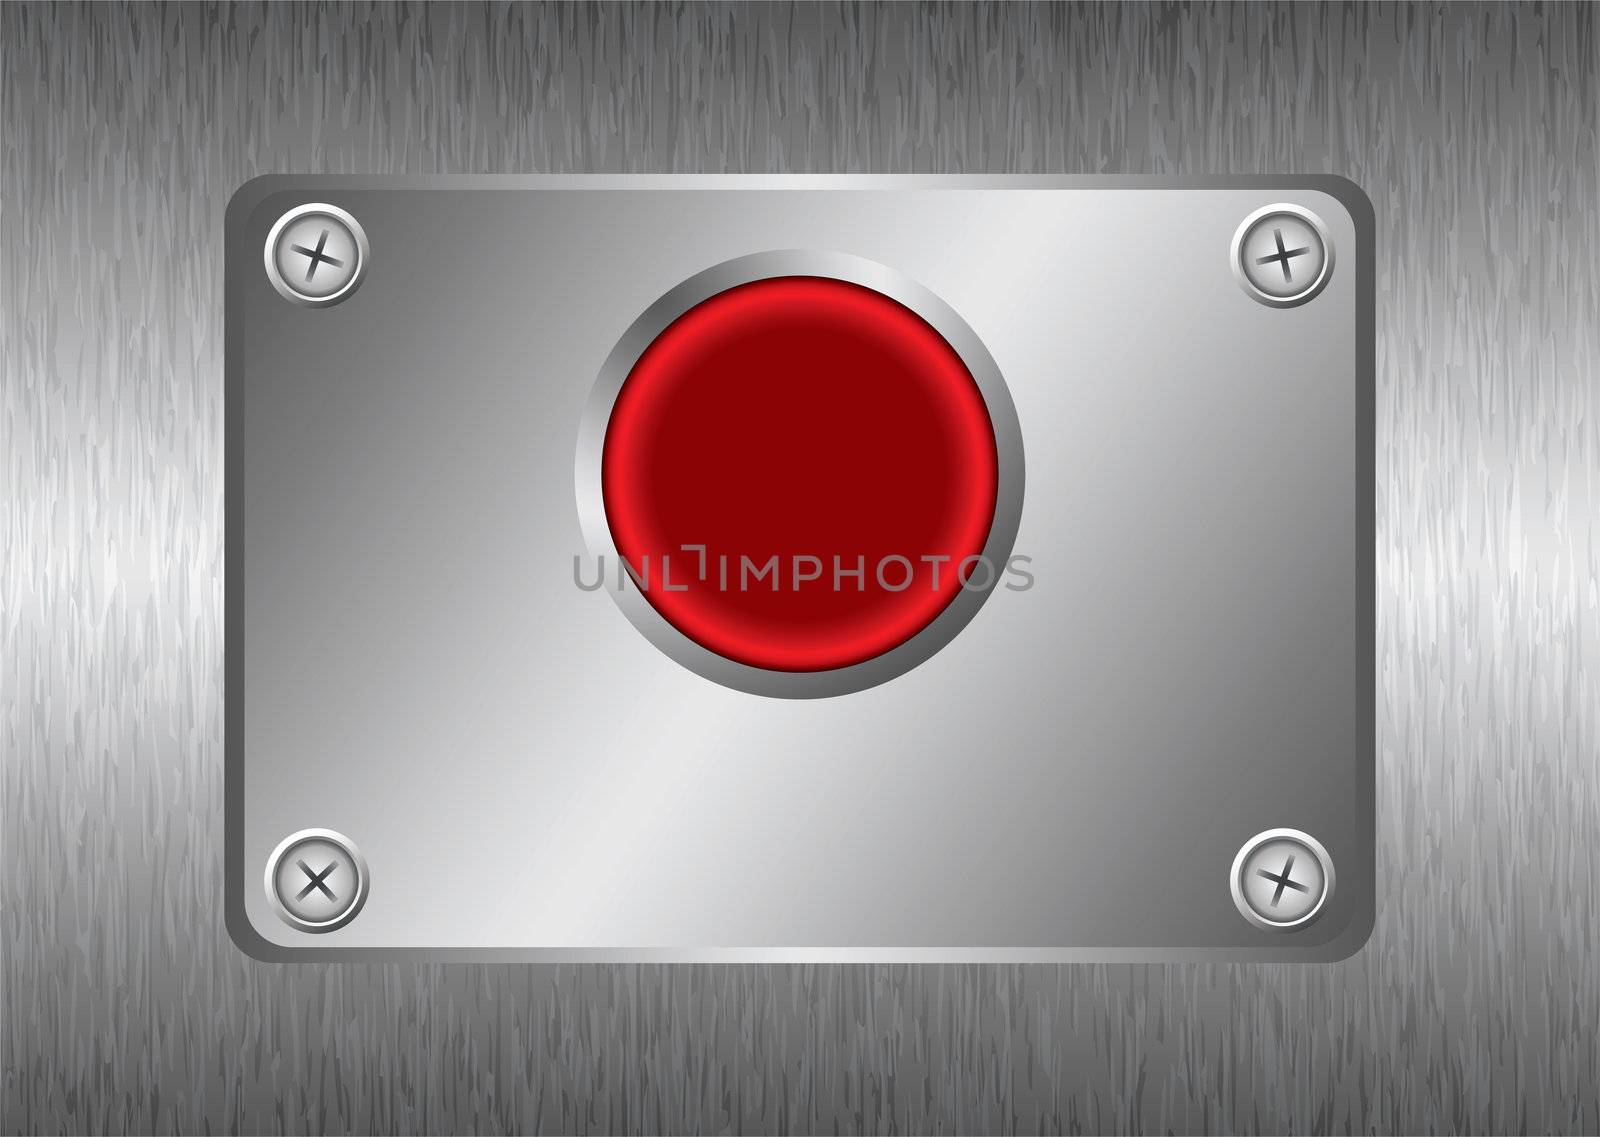 Abstract brushed metal background with red button and silver screws